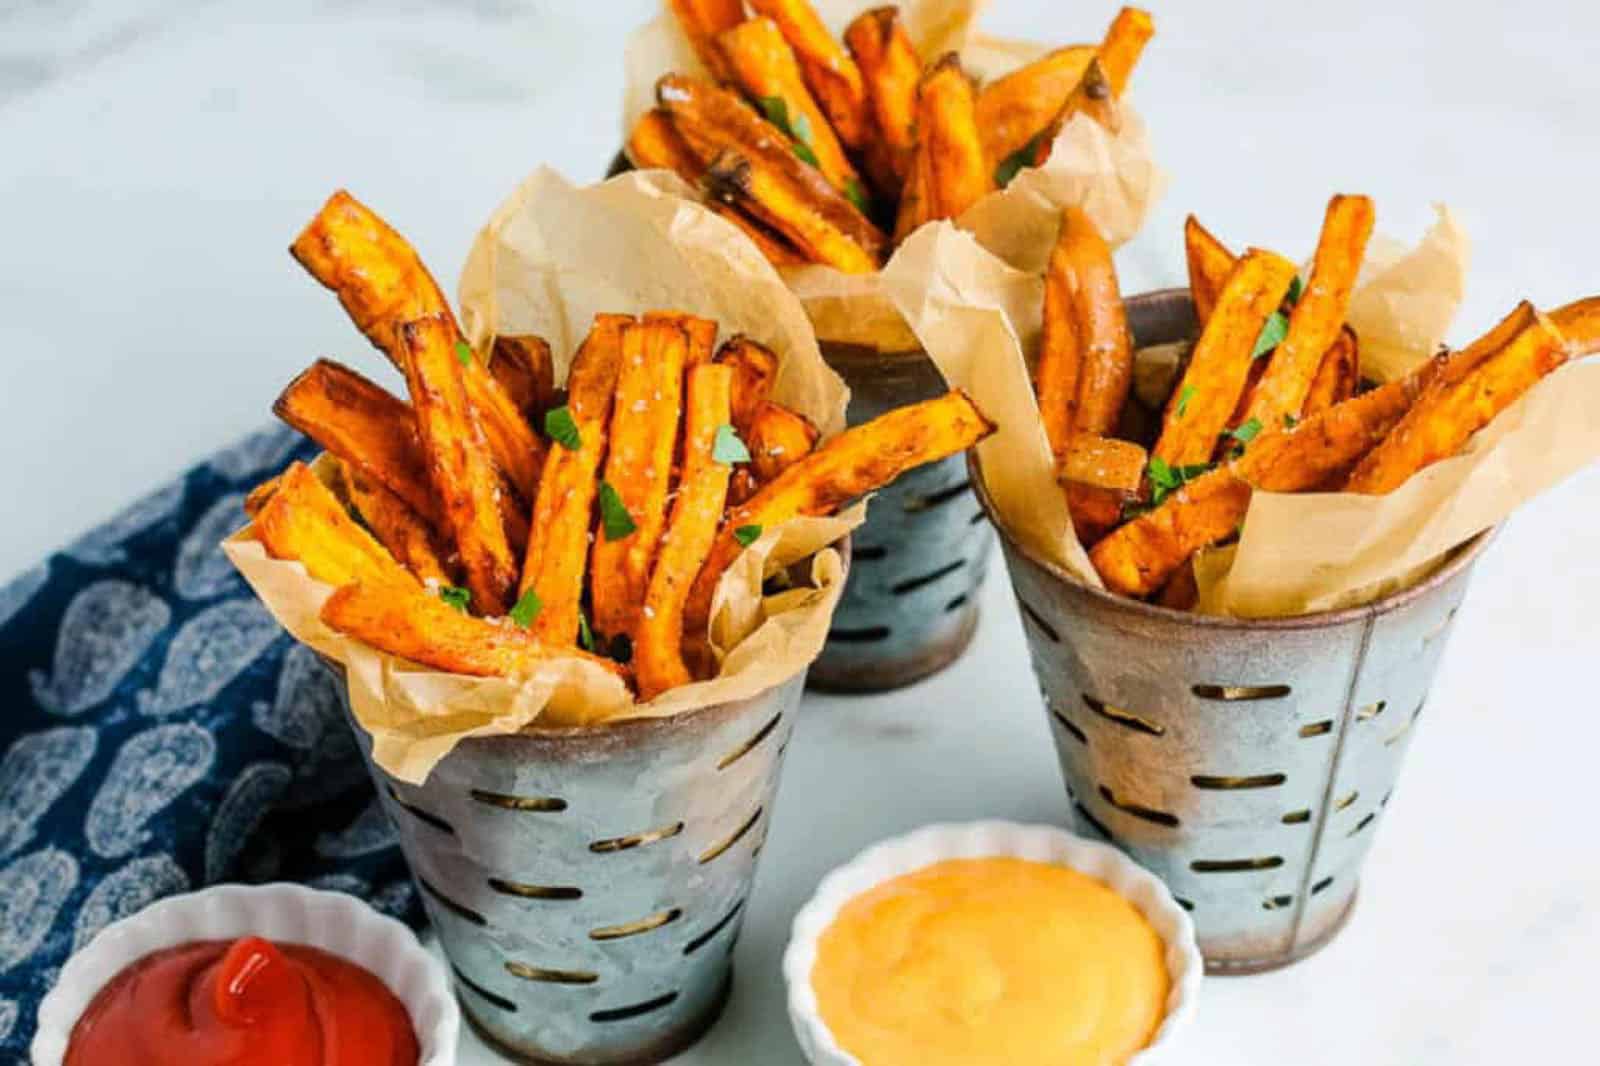 Sweet potato fries in metal baskets with mustard and ketchup in dipping bowls.